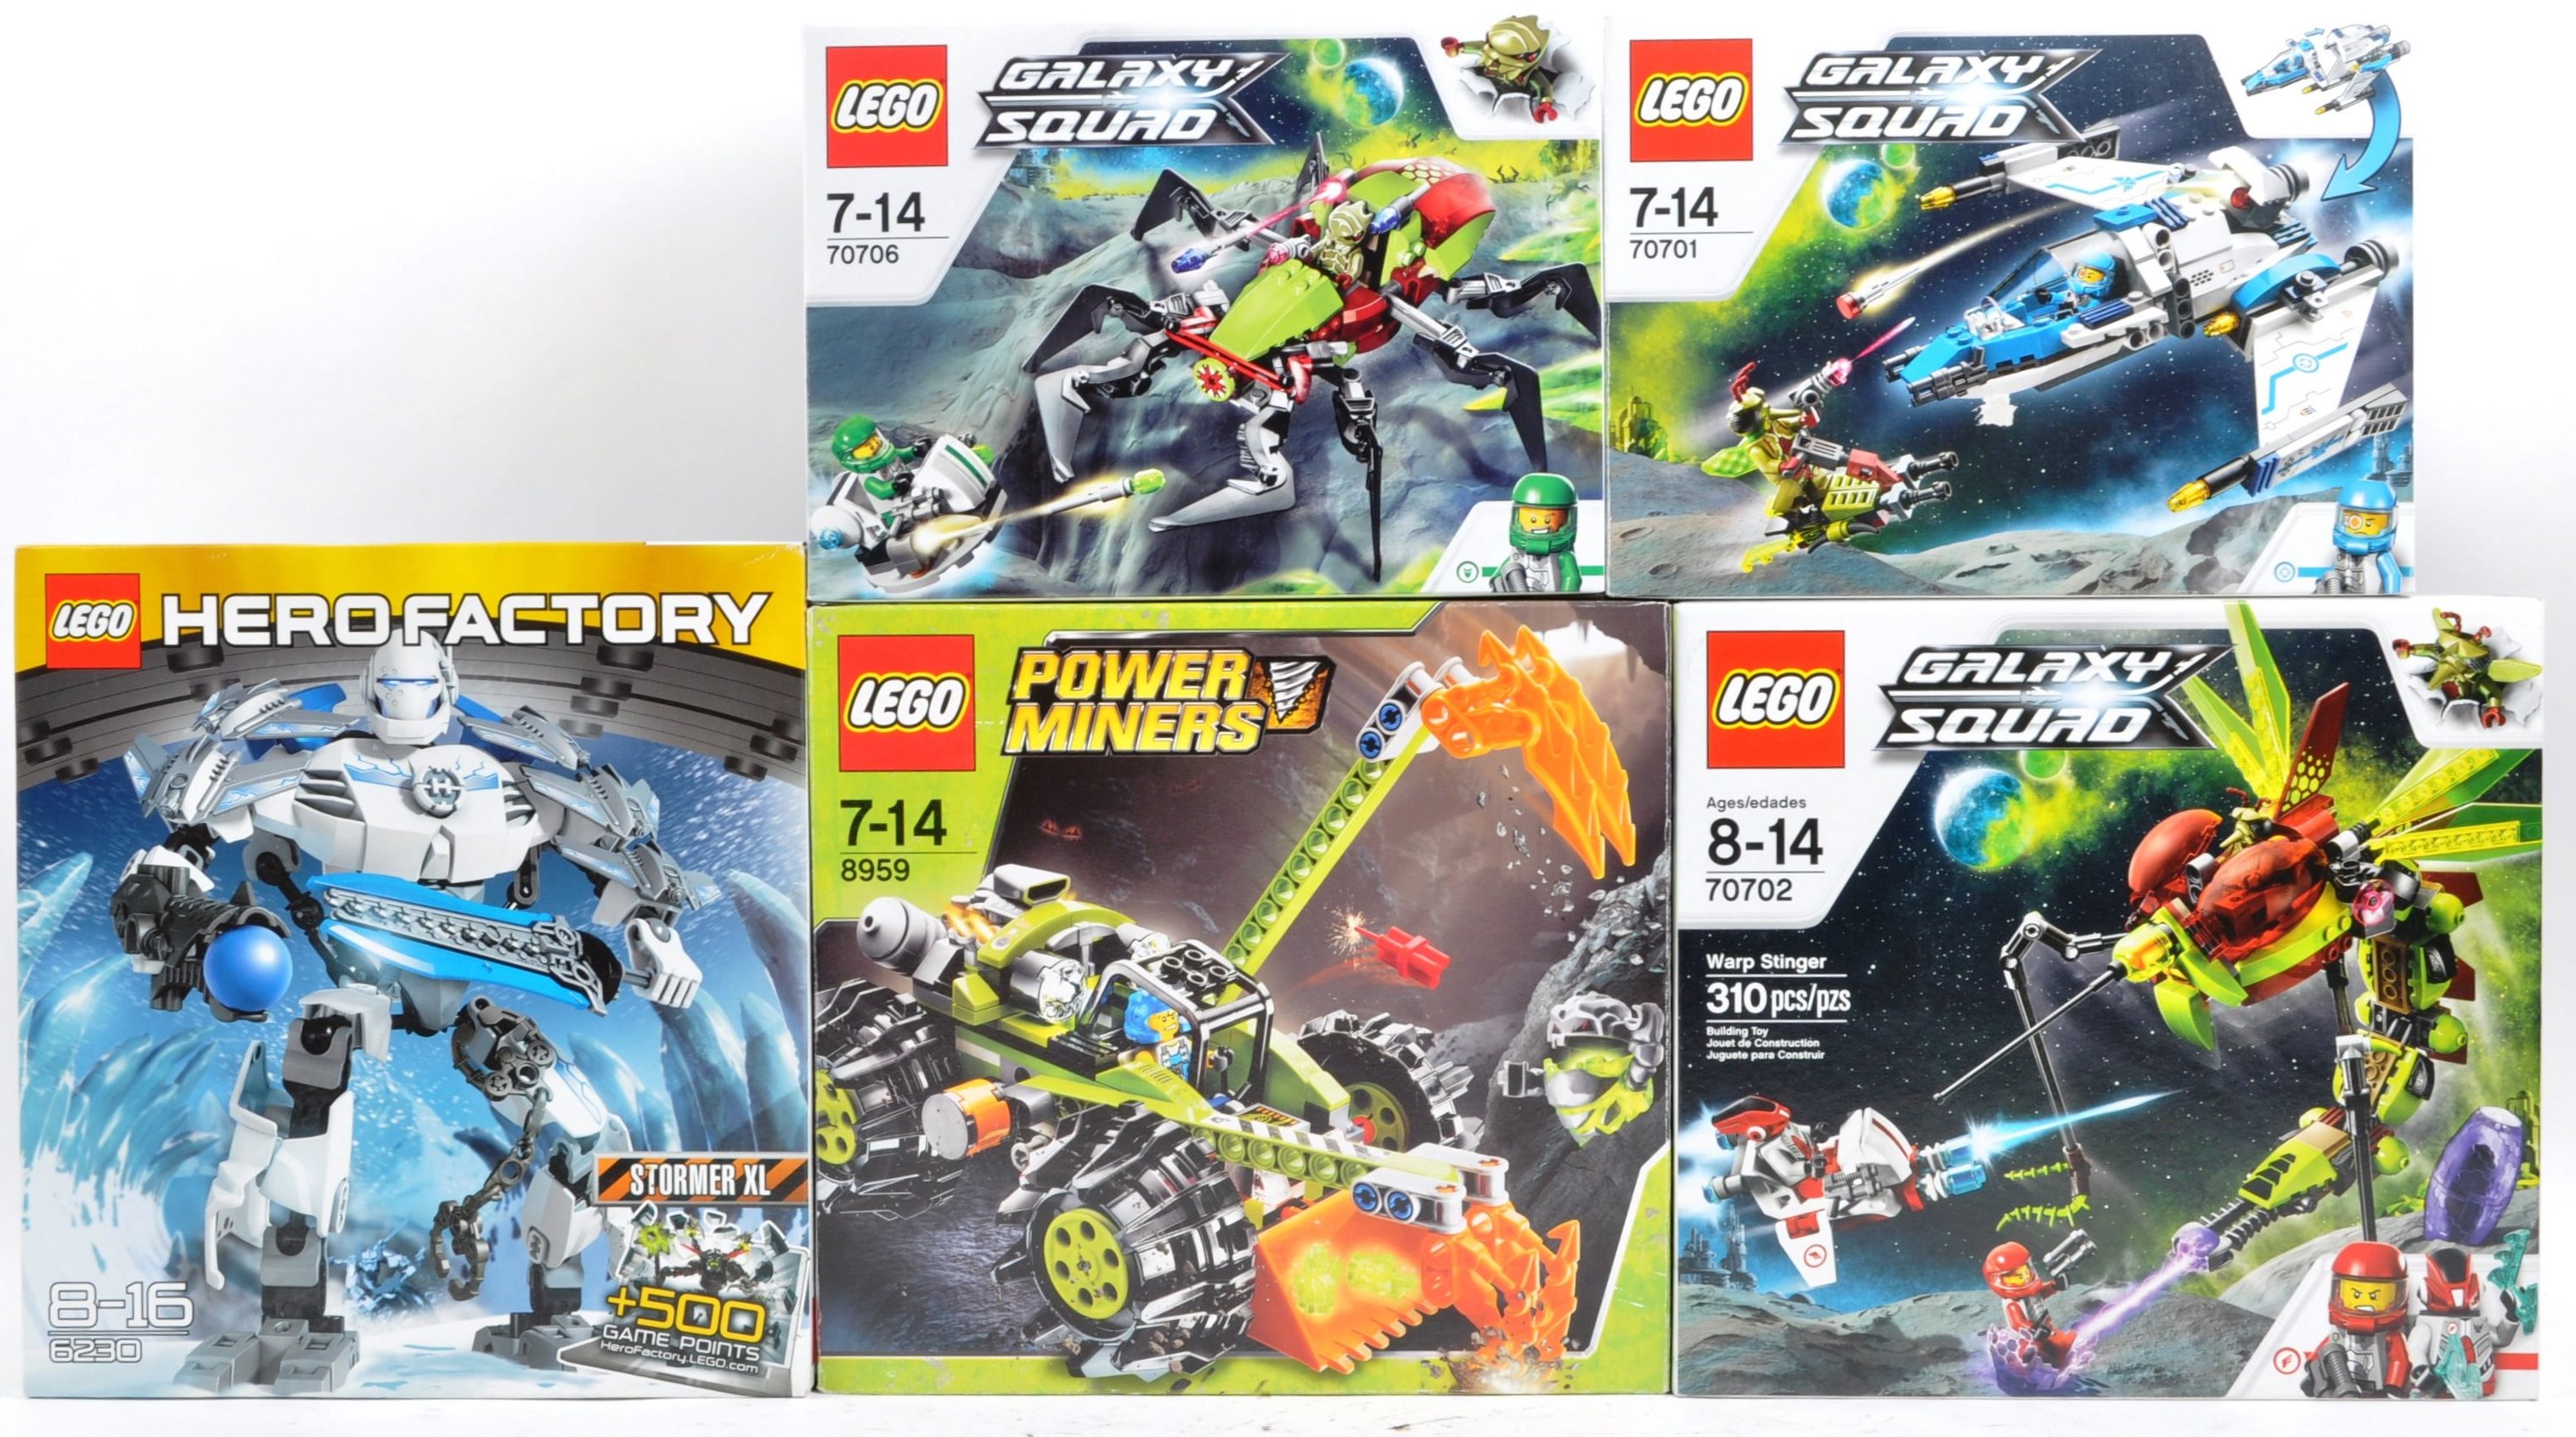 LEGO SETS - GALAXY SQUAD - HERO FACTORY - POWER MINERS